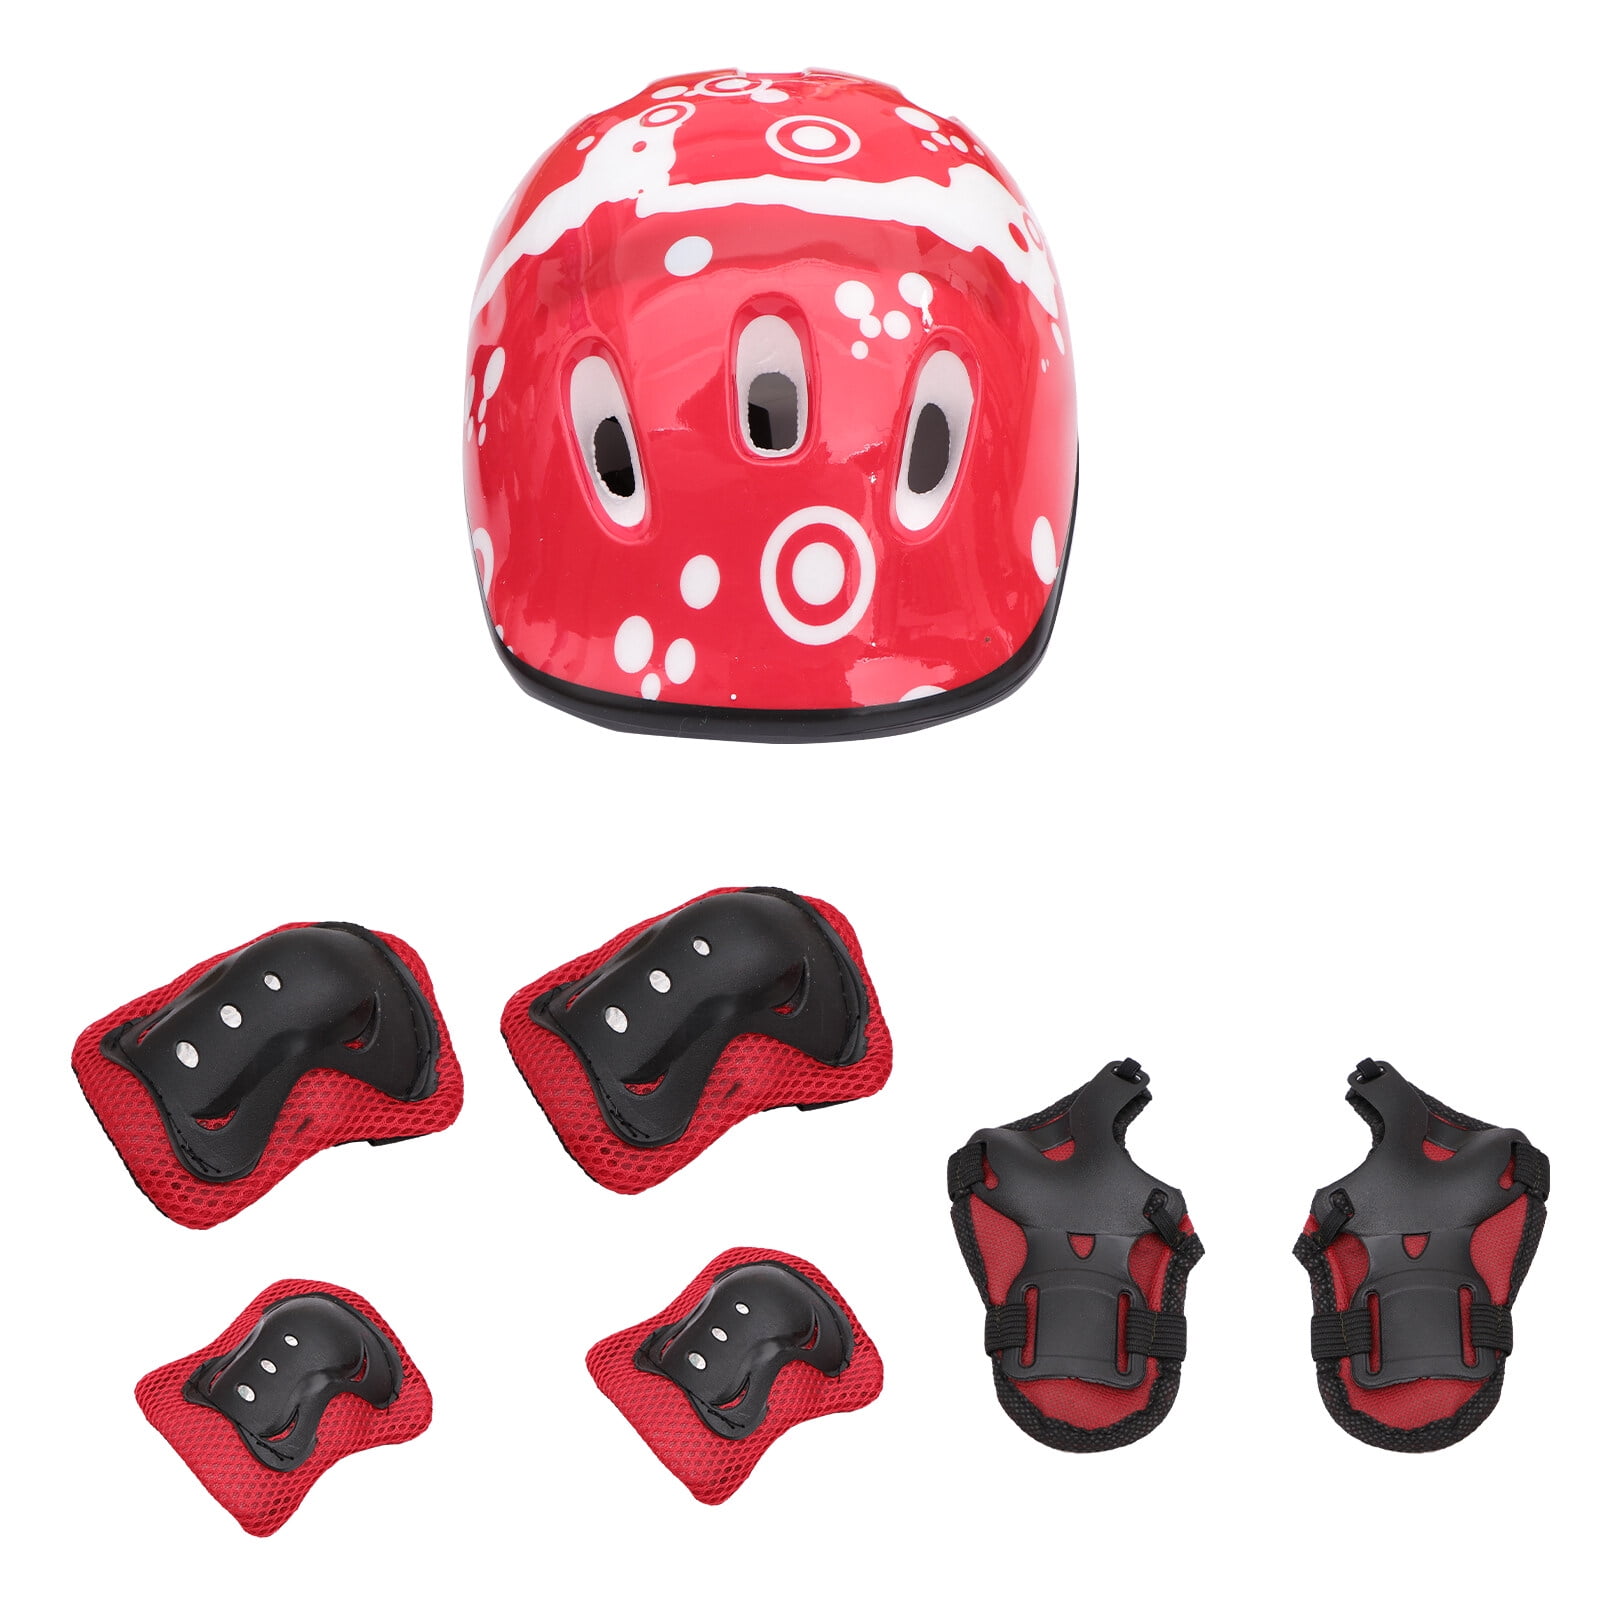 Children's Protective Gear Set Skate Helmet Elbow Wrist Knee Pads For  Scooter Bike Scooter (set Of 7 - Red)